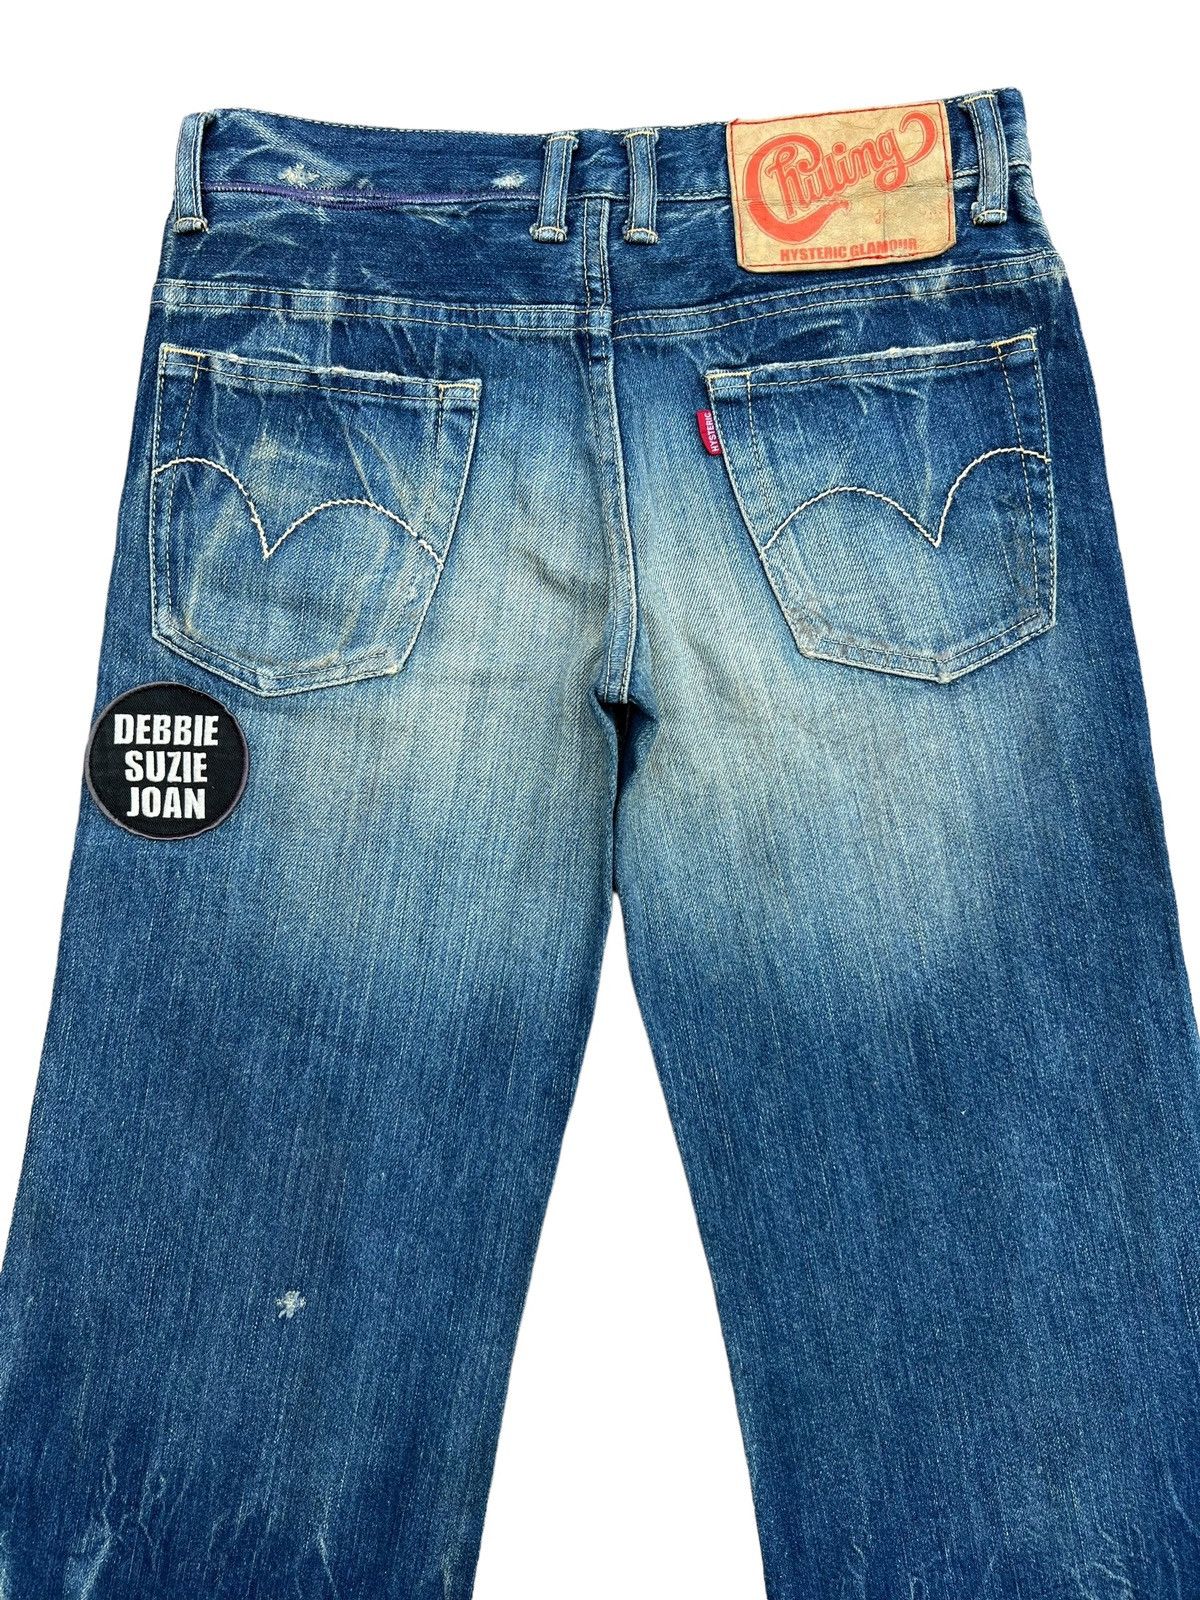 Hysteric Glamour Distressed Lowrise Flare Denim Jeans 29x32 - 6